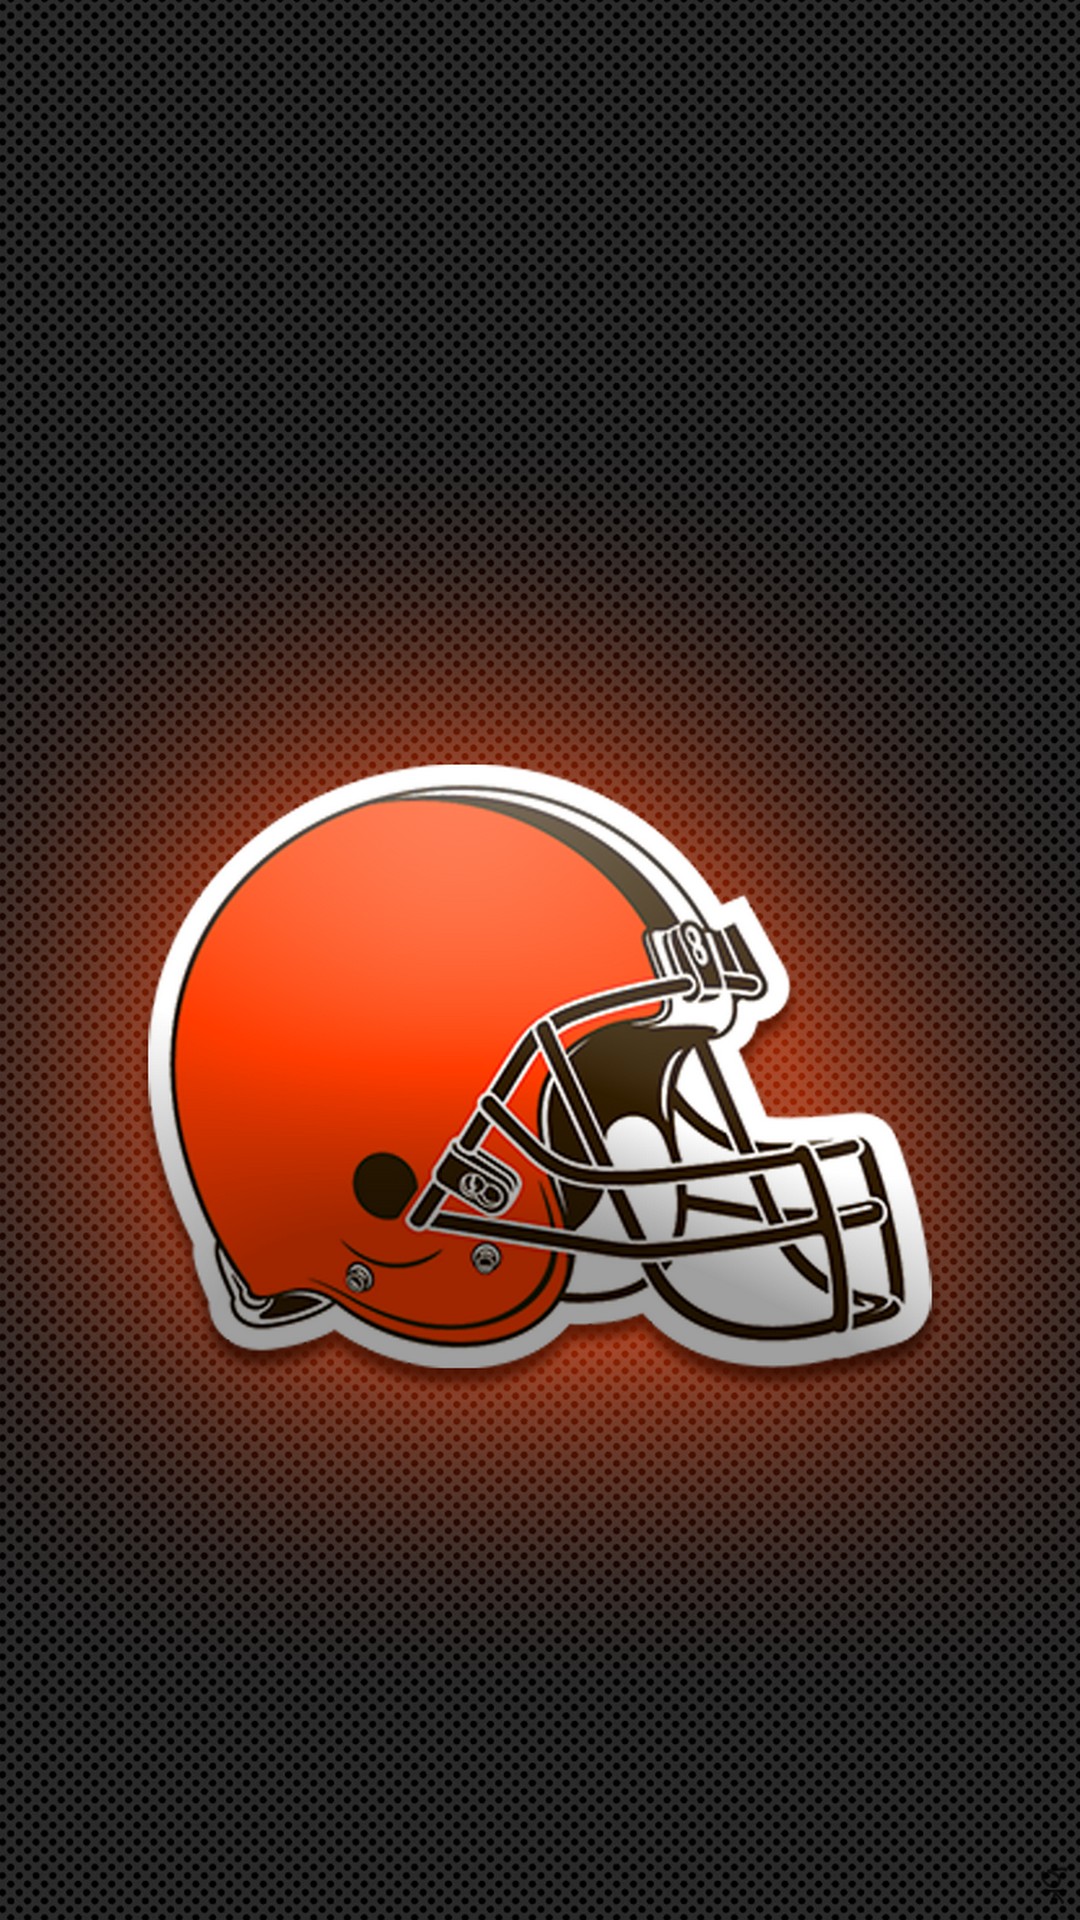 Cleveland Browns iPhone X Wallpaper with high-resolution 1080x1920 pixel. Download and set as wallpaper for Apple iPhone X, XS Max, XR, 8, 7, 6, SE, iPad, Android